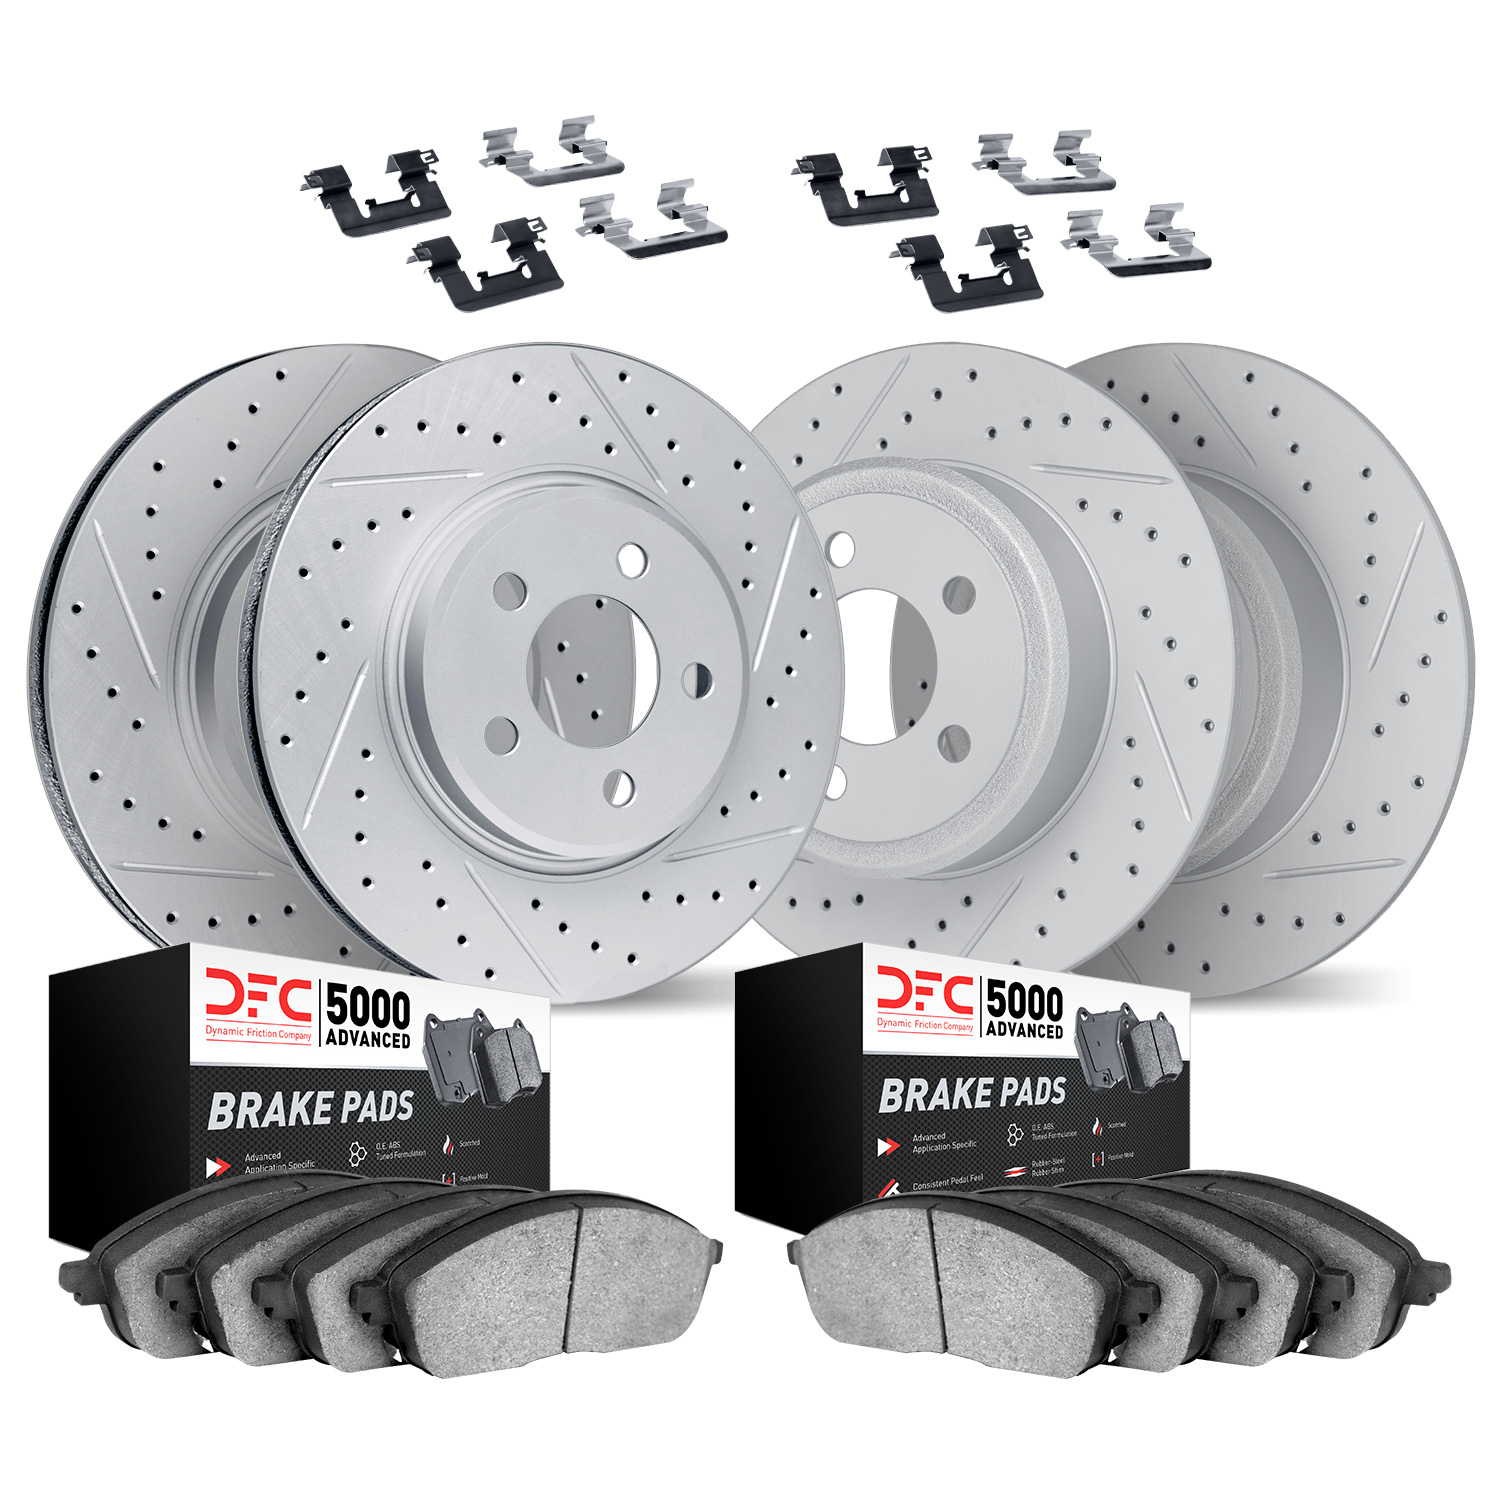 2514-53014 Geoperformance Drilled/Slotted Rotors w/5000 Advanced Brake Pads Kit & Hardware, 2004-2012 GM, Position: Front and Re